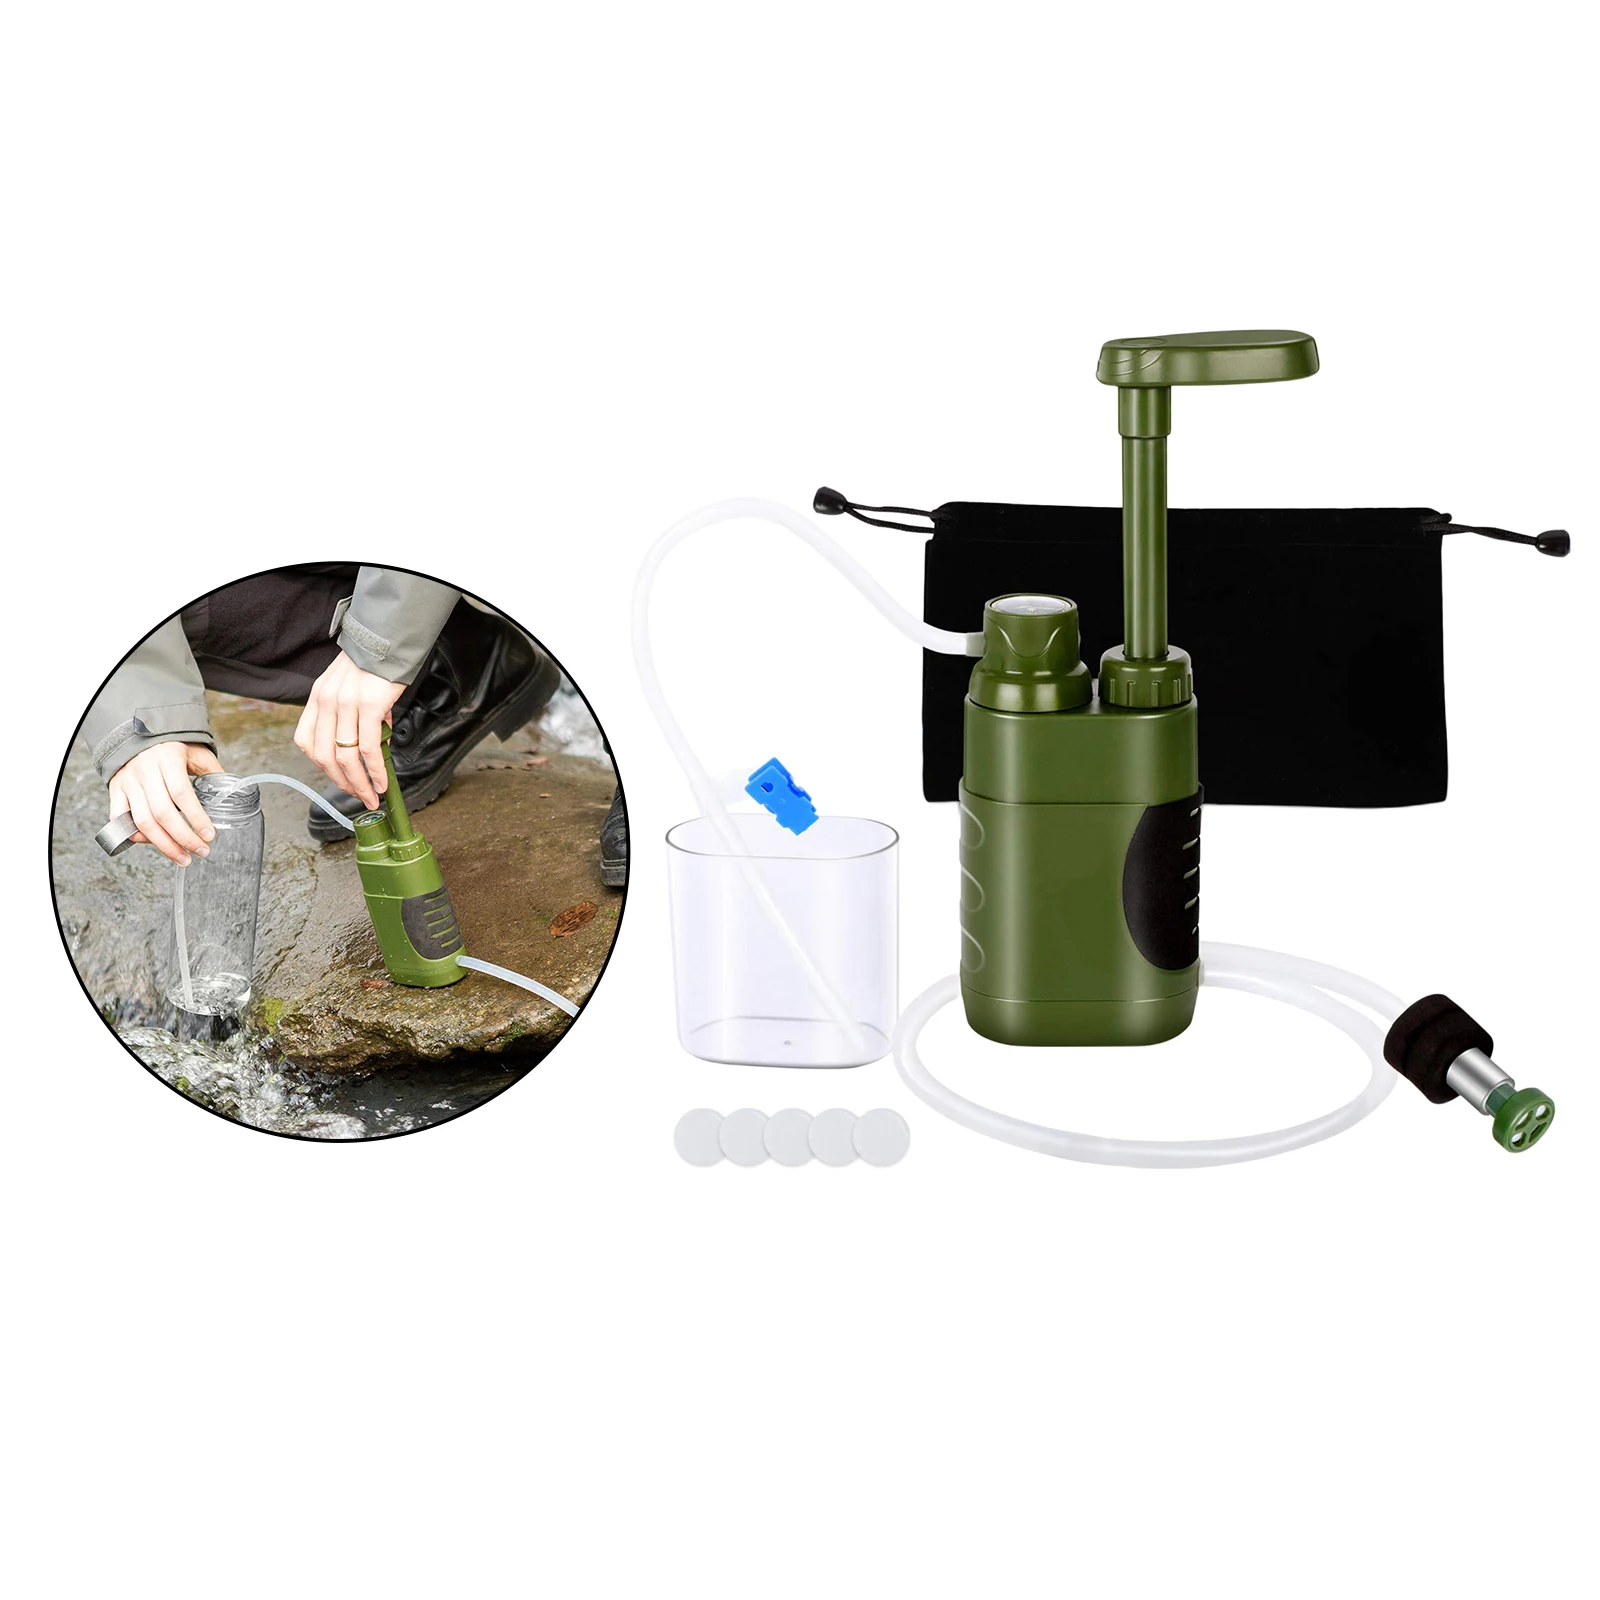 Compact Portable Outdoor Survival Water Filter Purifier Filtration, for Safe Outdoor Drinking